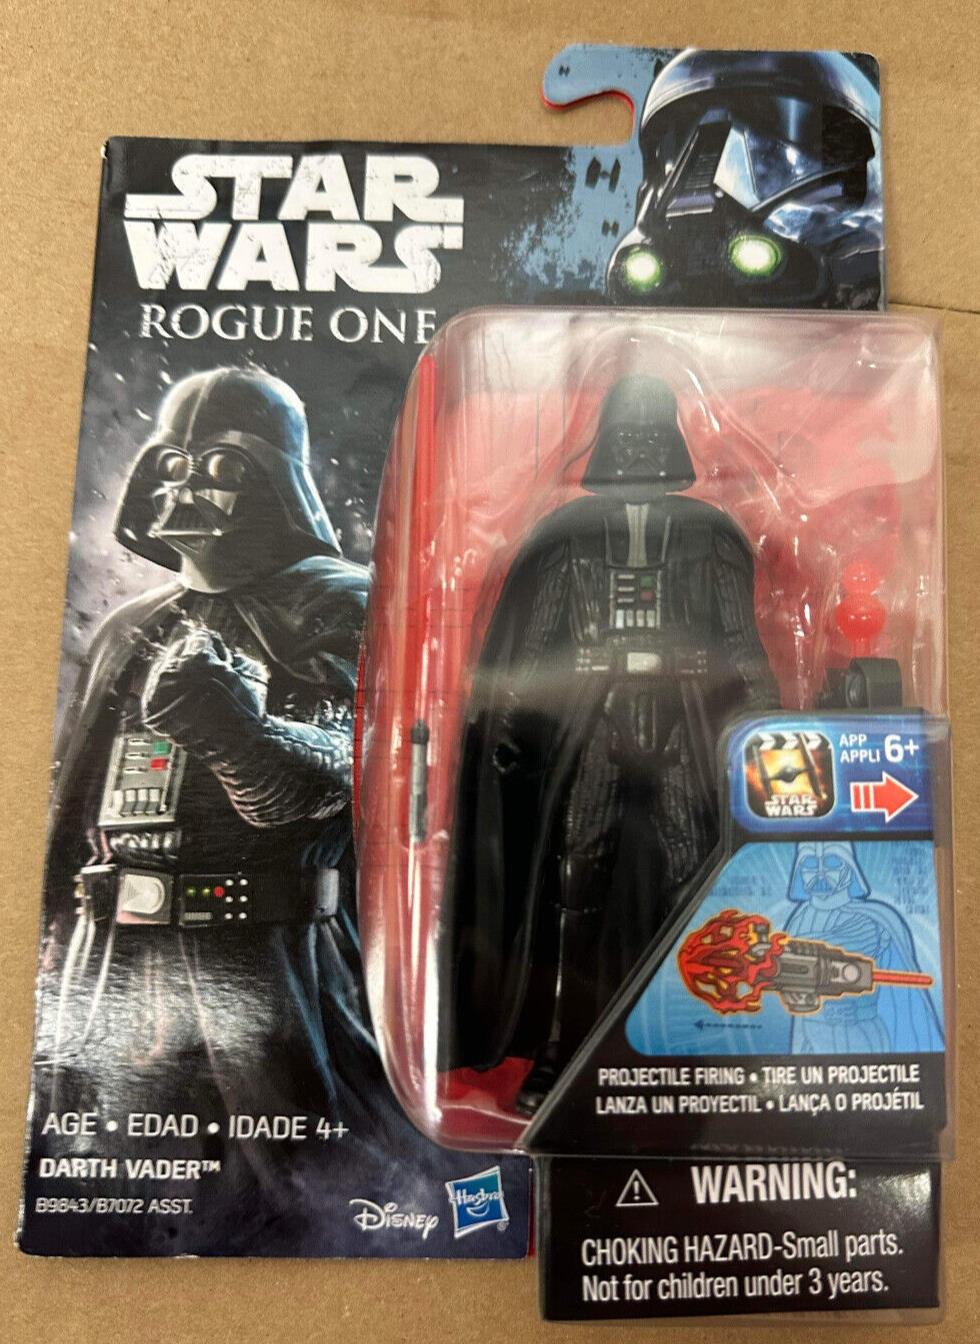 Darth Vader SITH LORD Rogue One A Star Wars Story 3.75" Action Figure 2016